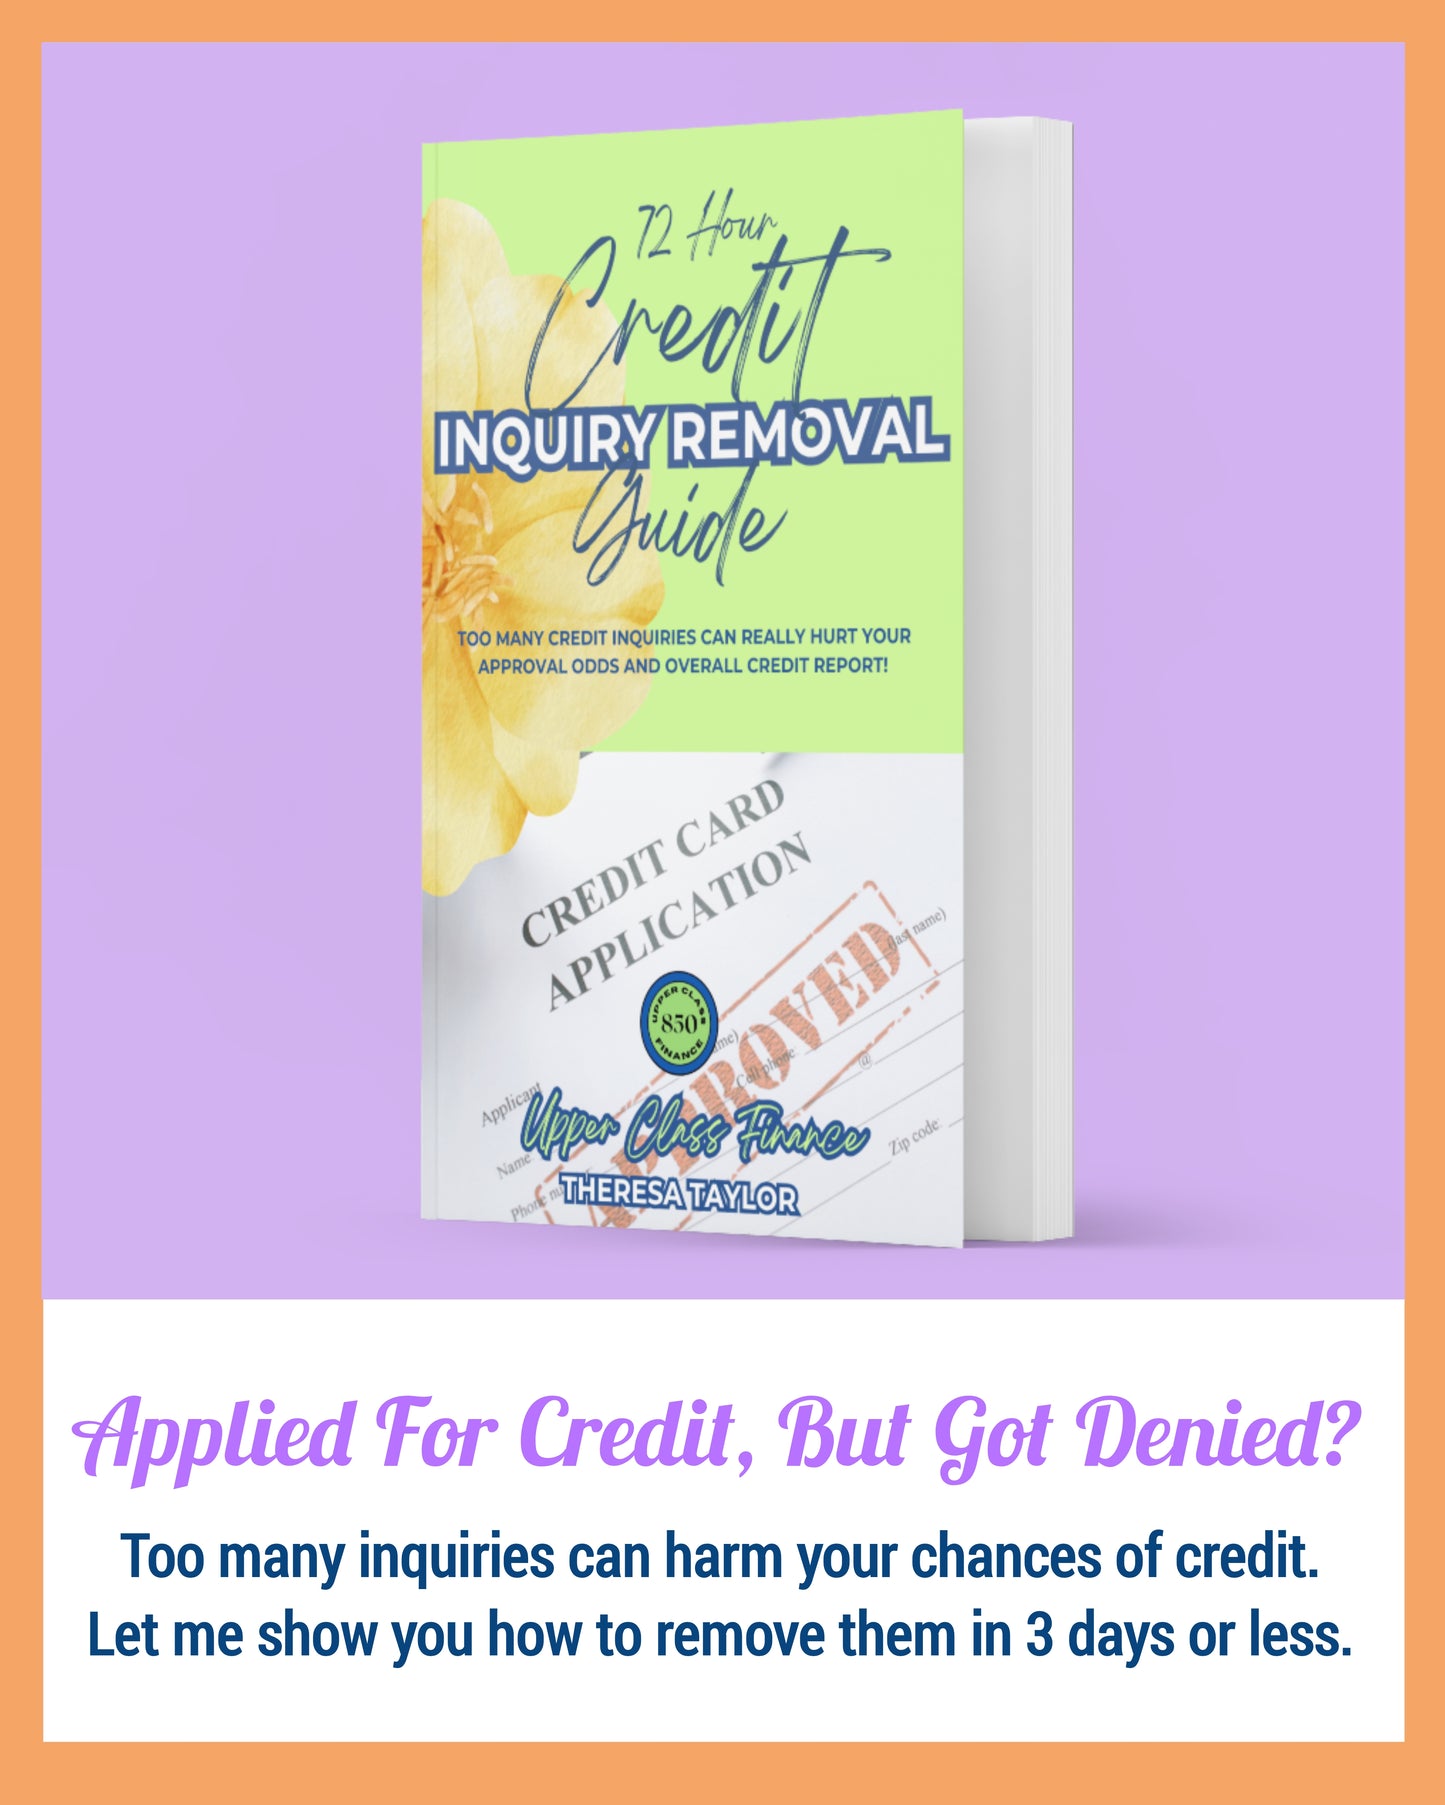 72-Hour Credit Inquiry Removal Guide (Instant eBook Download)